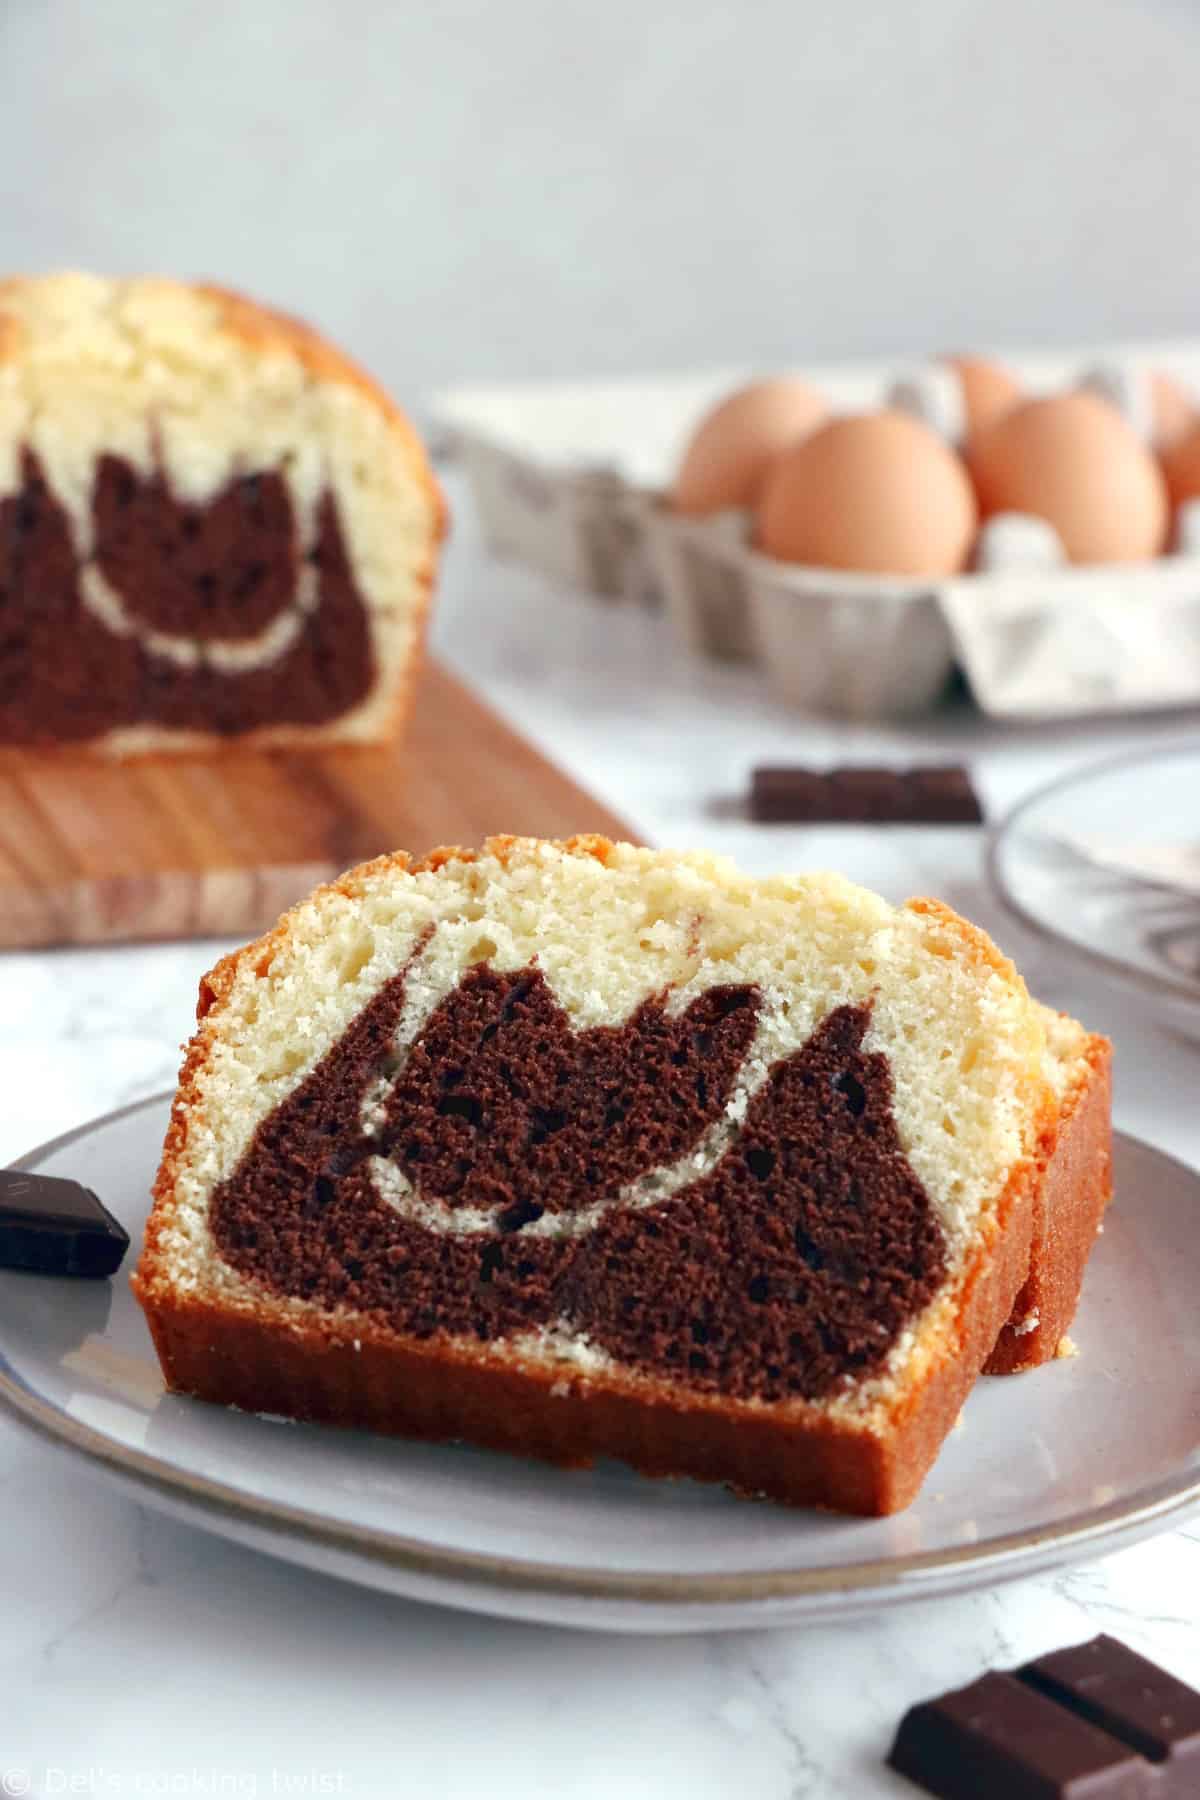 Easy Chocolate Marble Yogurt Cake has become a basic recipe in my house. It's light, fluffy, moist, delicious, and ready in no time.